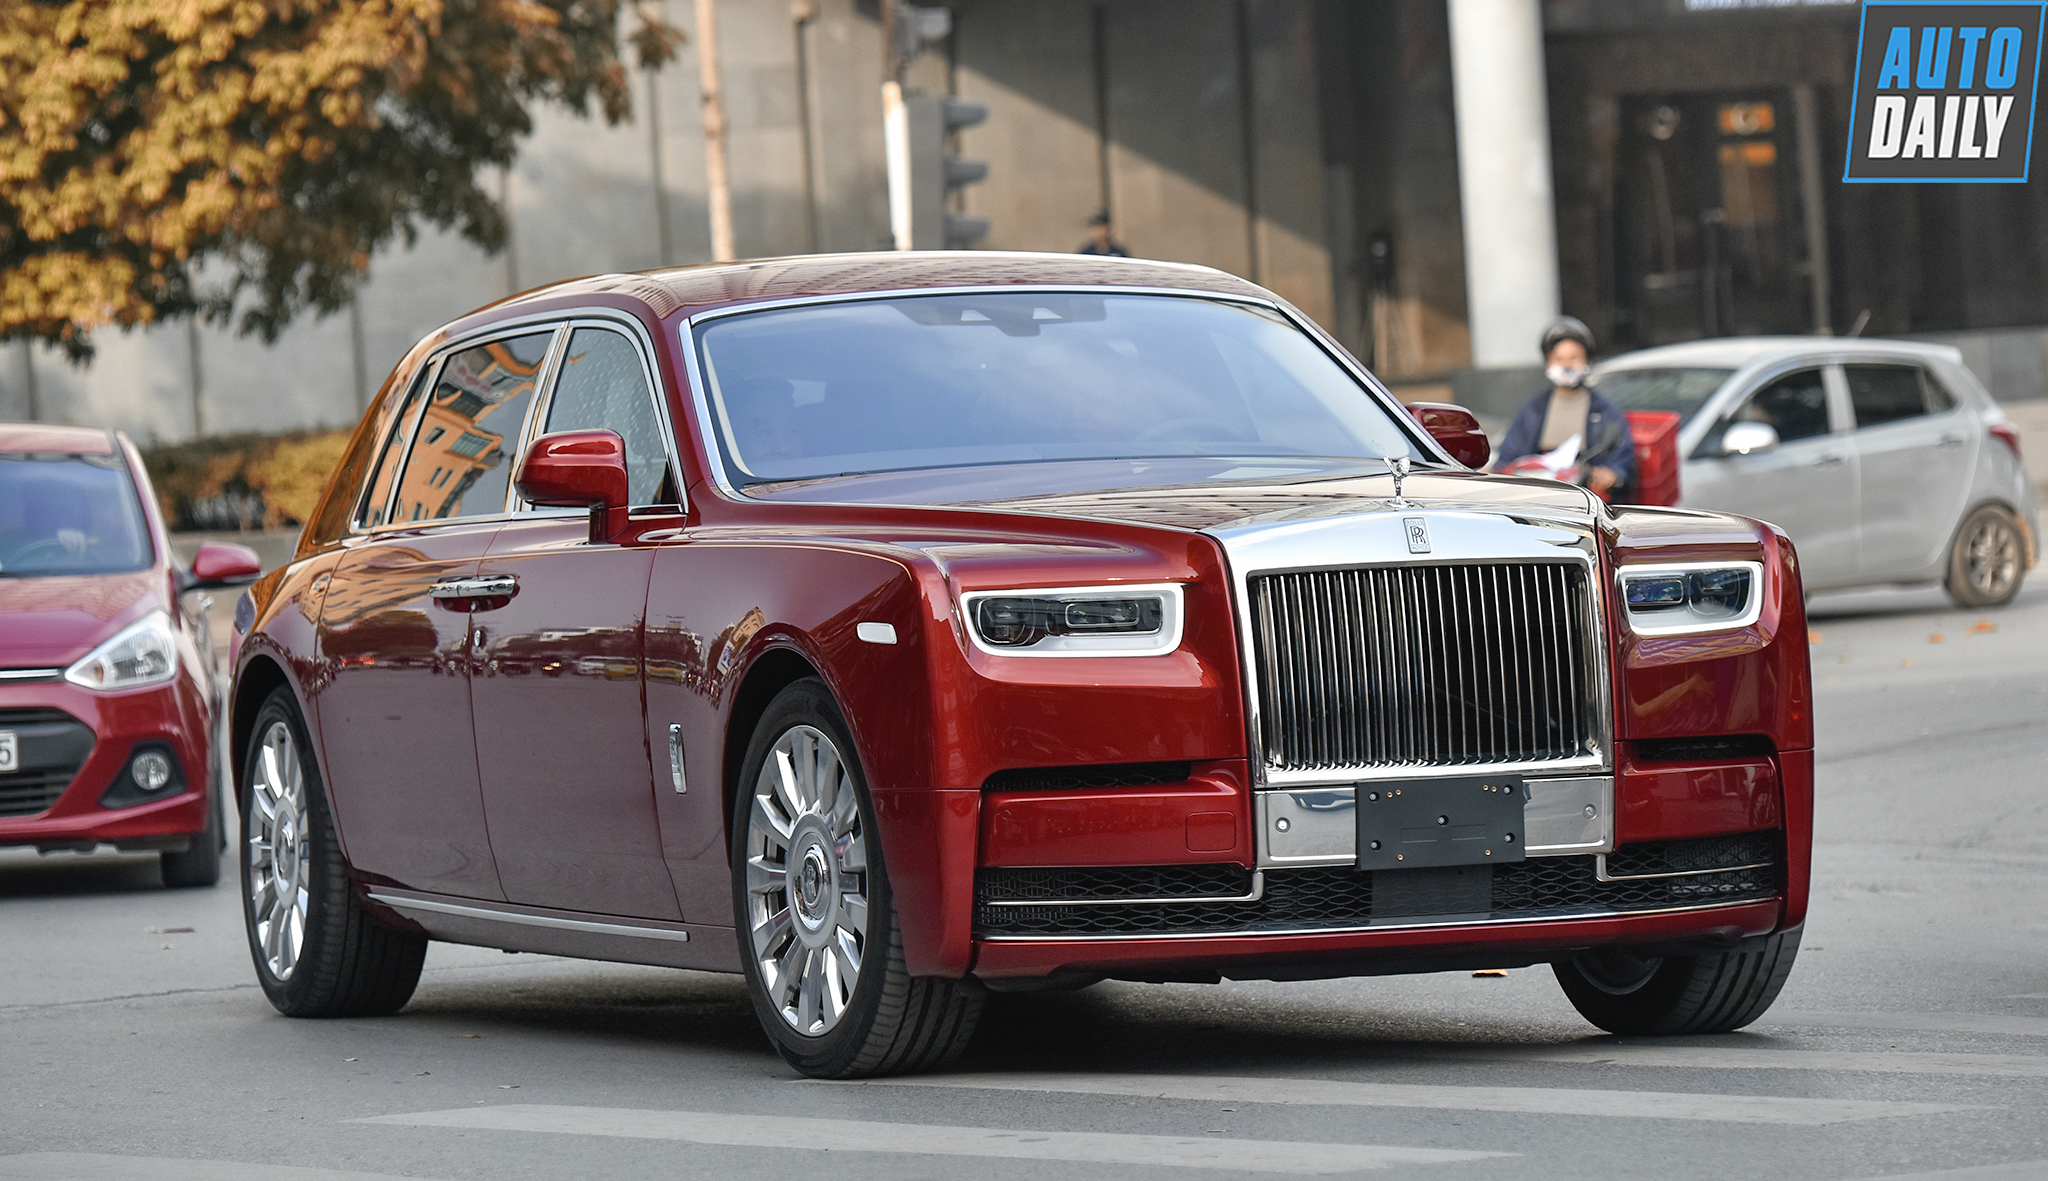 2019 Rolls Royce Ghost in Dubai United Arab Emirates  Rolls Royce Ghost  2019  Under Warranty and Service Contract